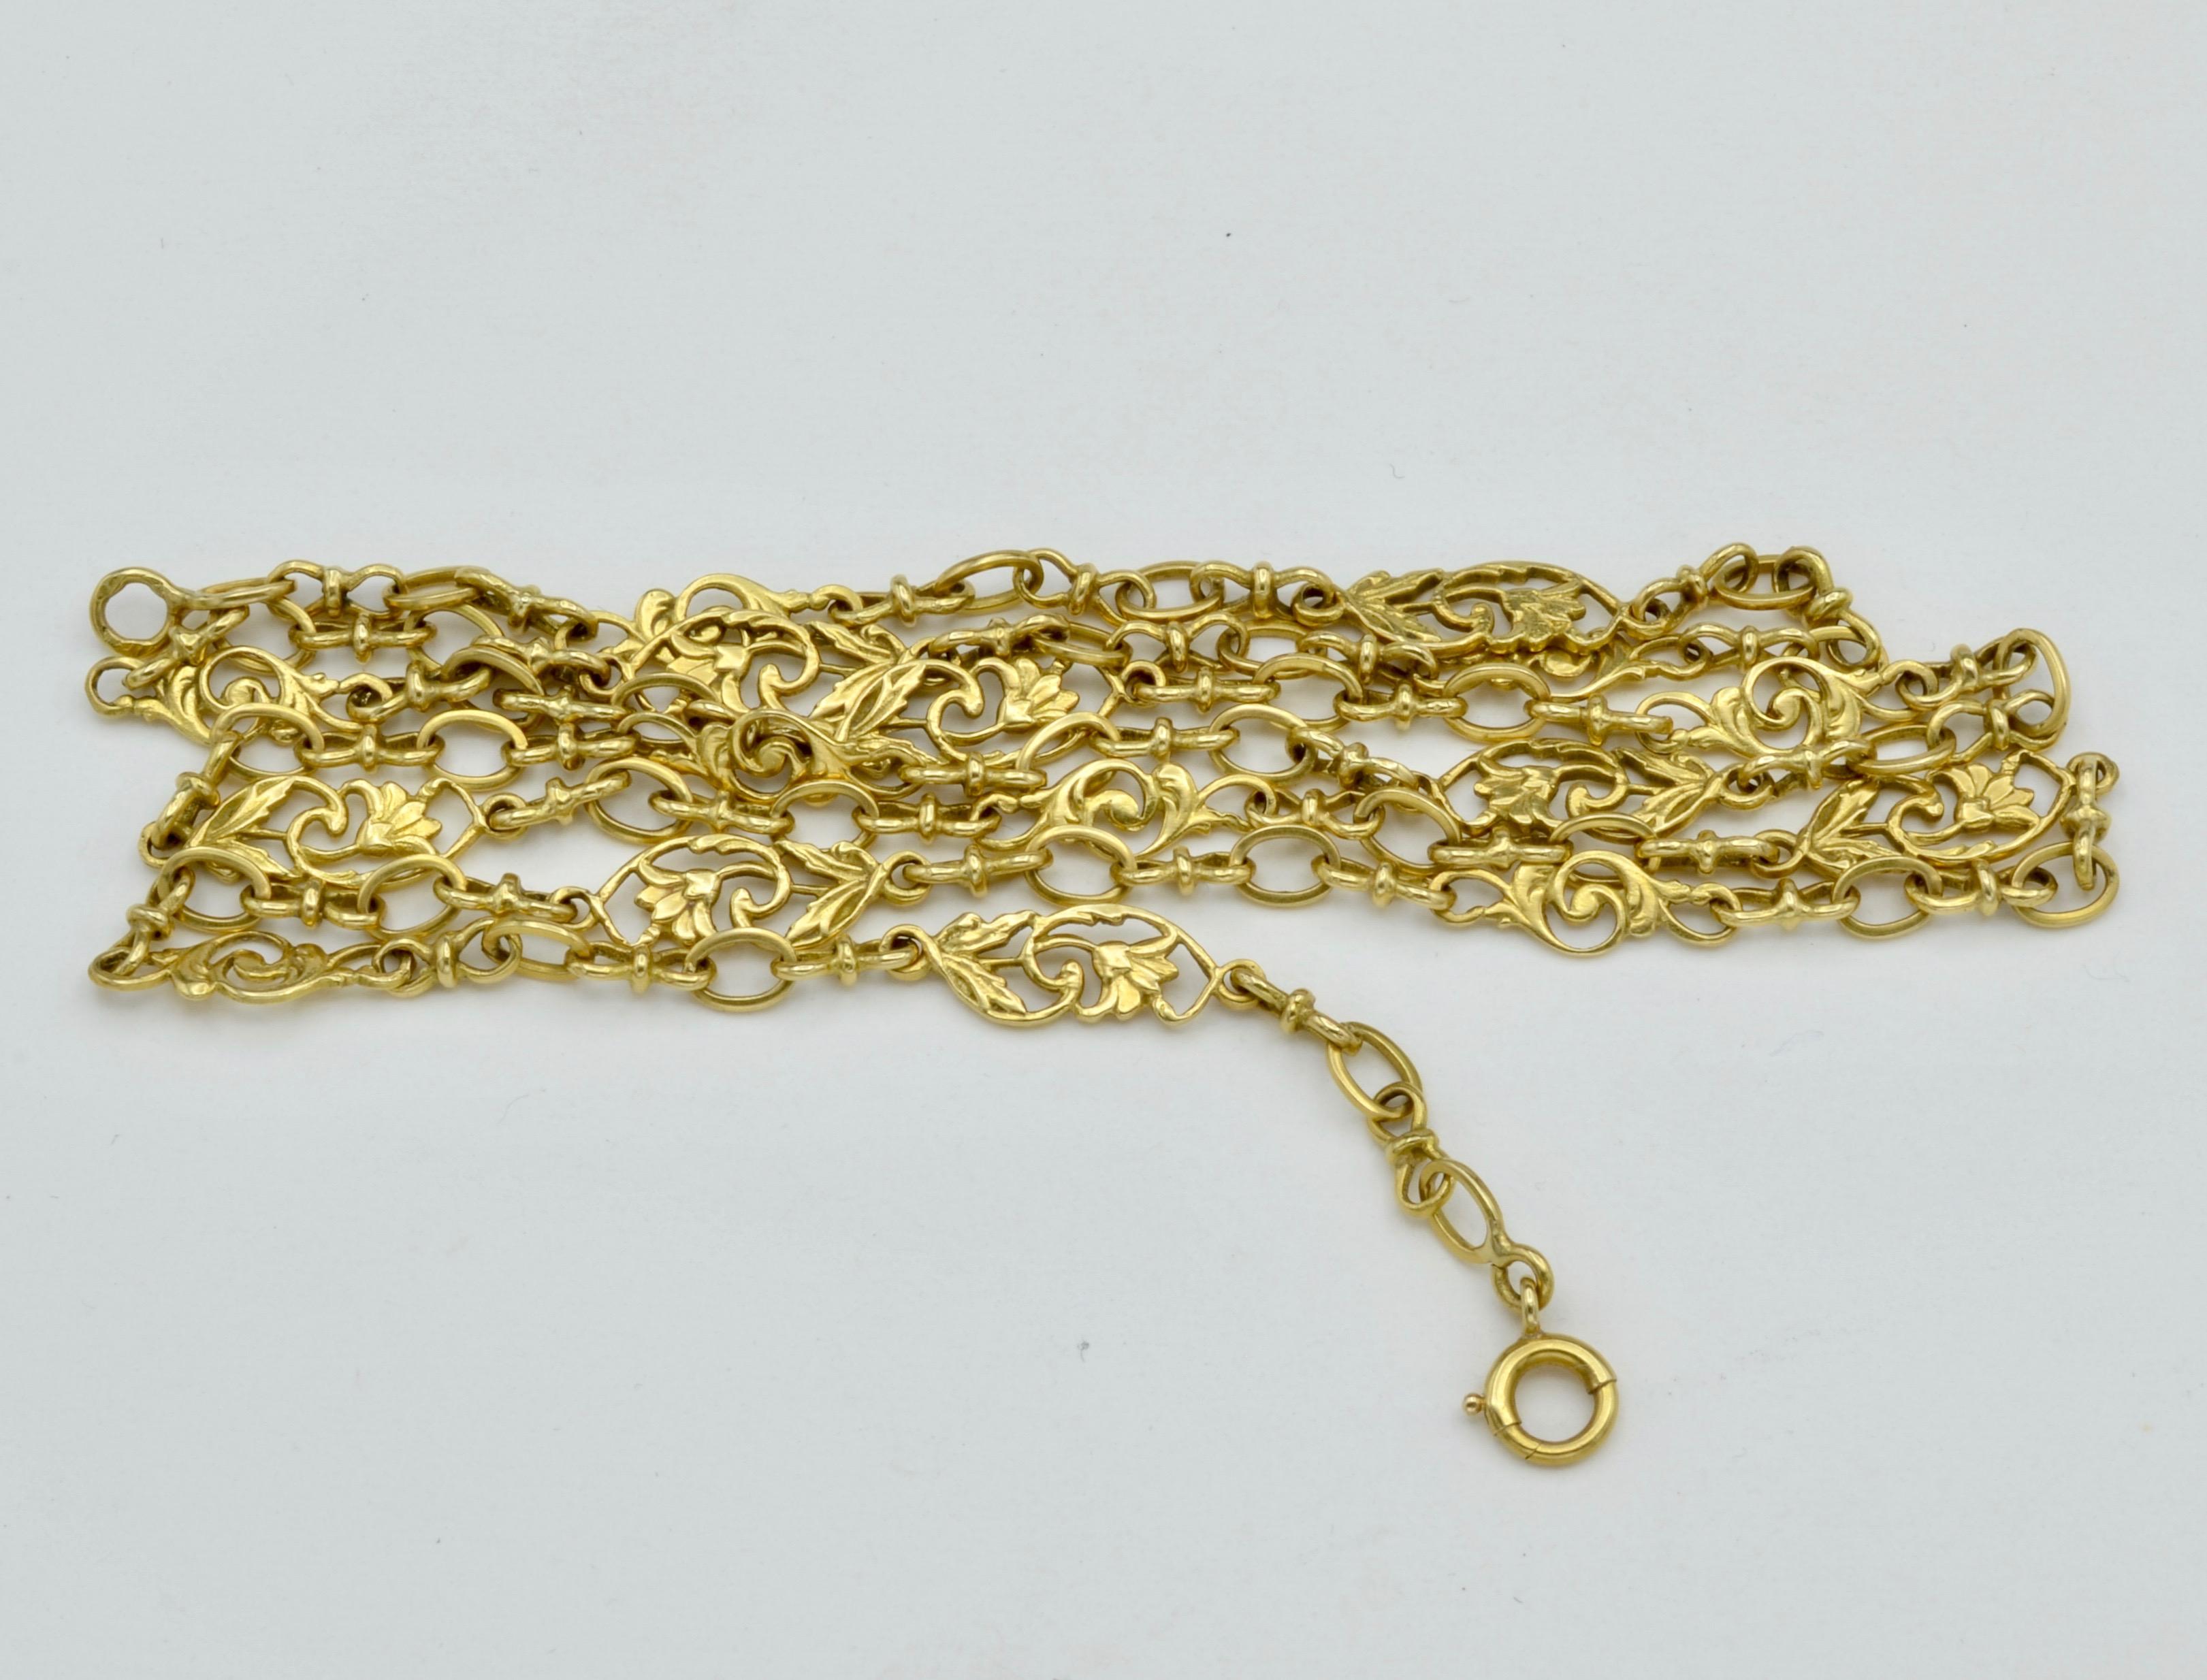 French Antique Sautoir Yellow Gold Chain Link Necklace with Lillies and Vines 1